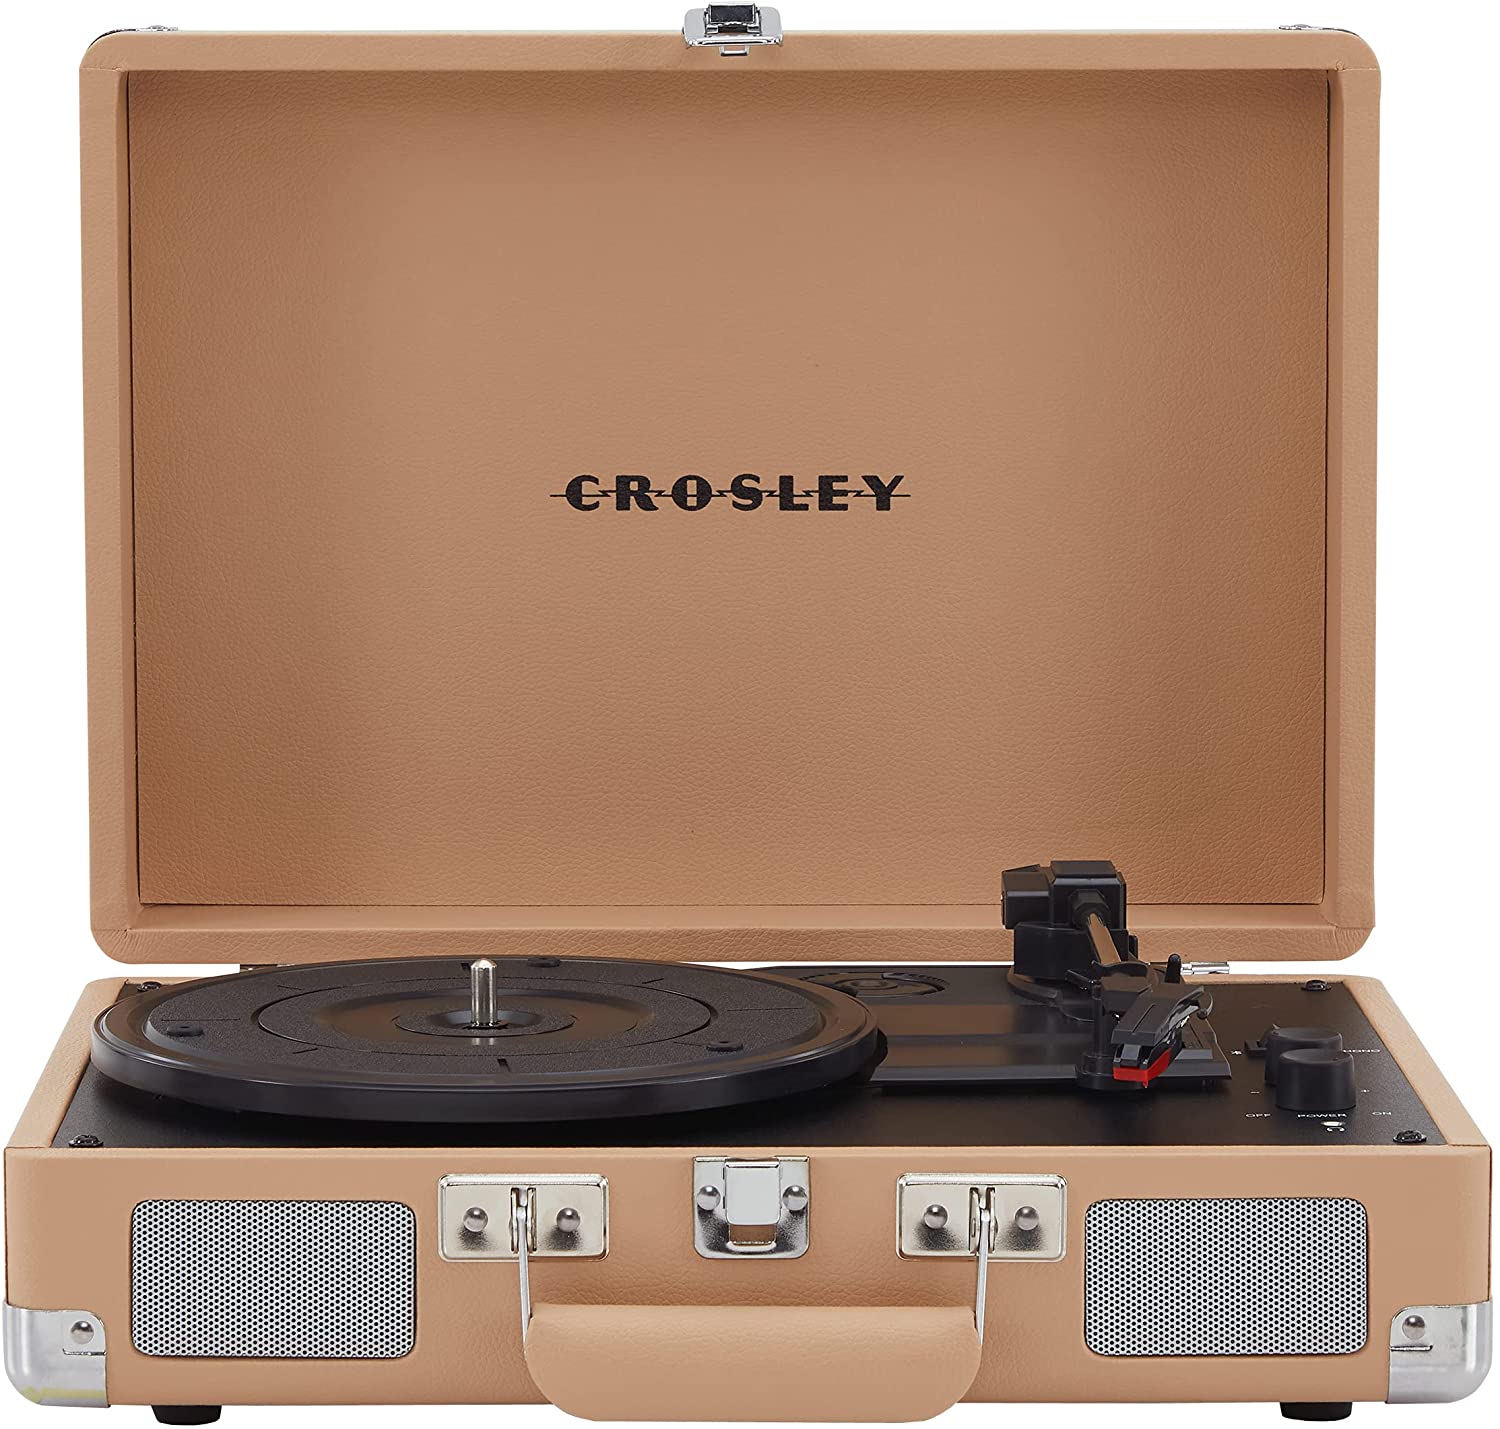 Crosley Cruiser Plus Record Player from Turntable Kitchens Guide to the Best Turntables Under $100